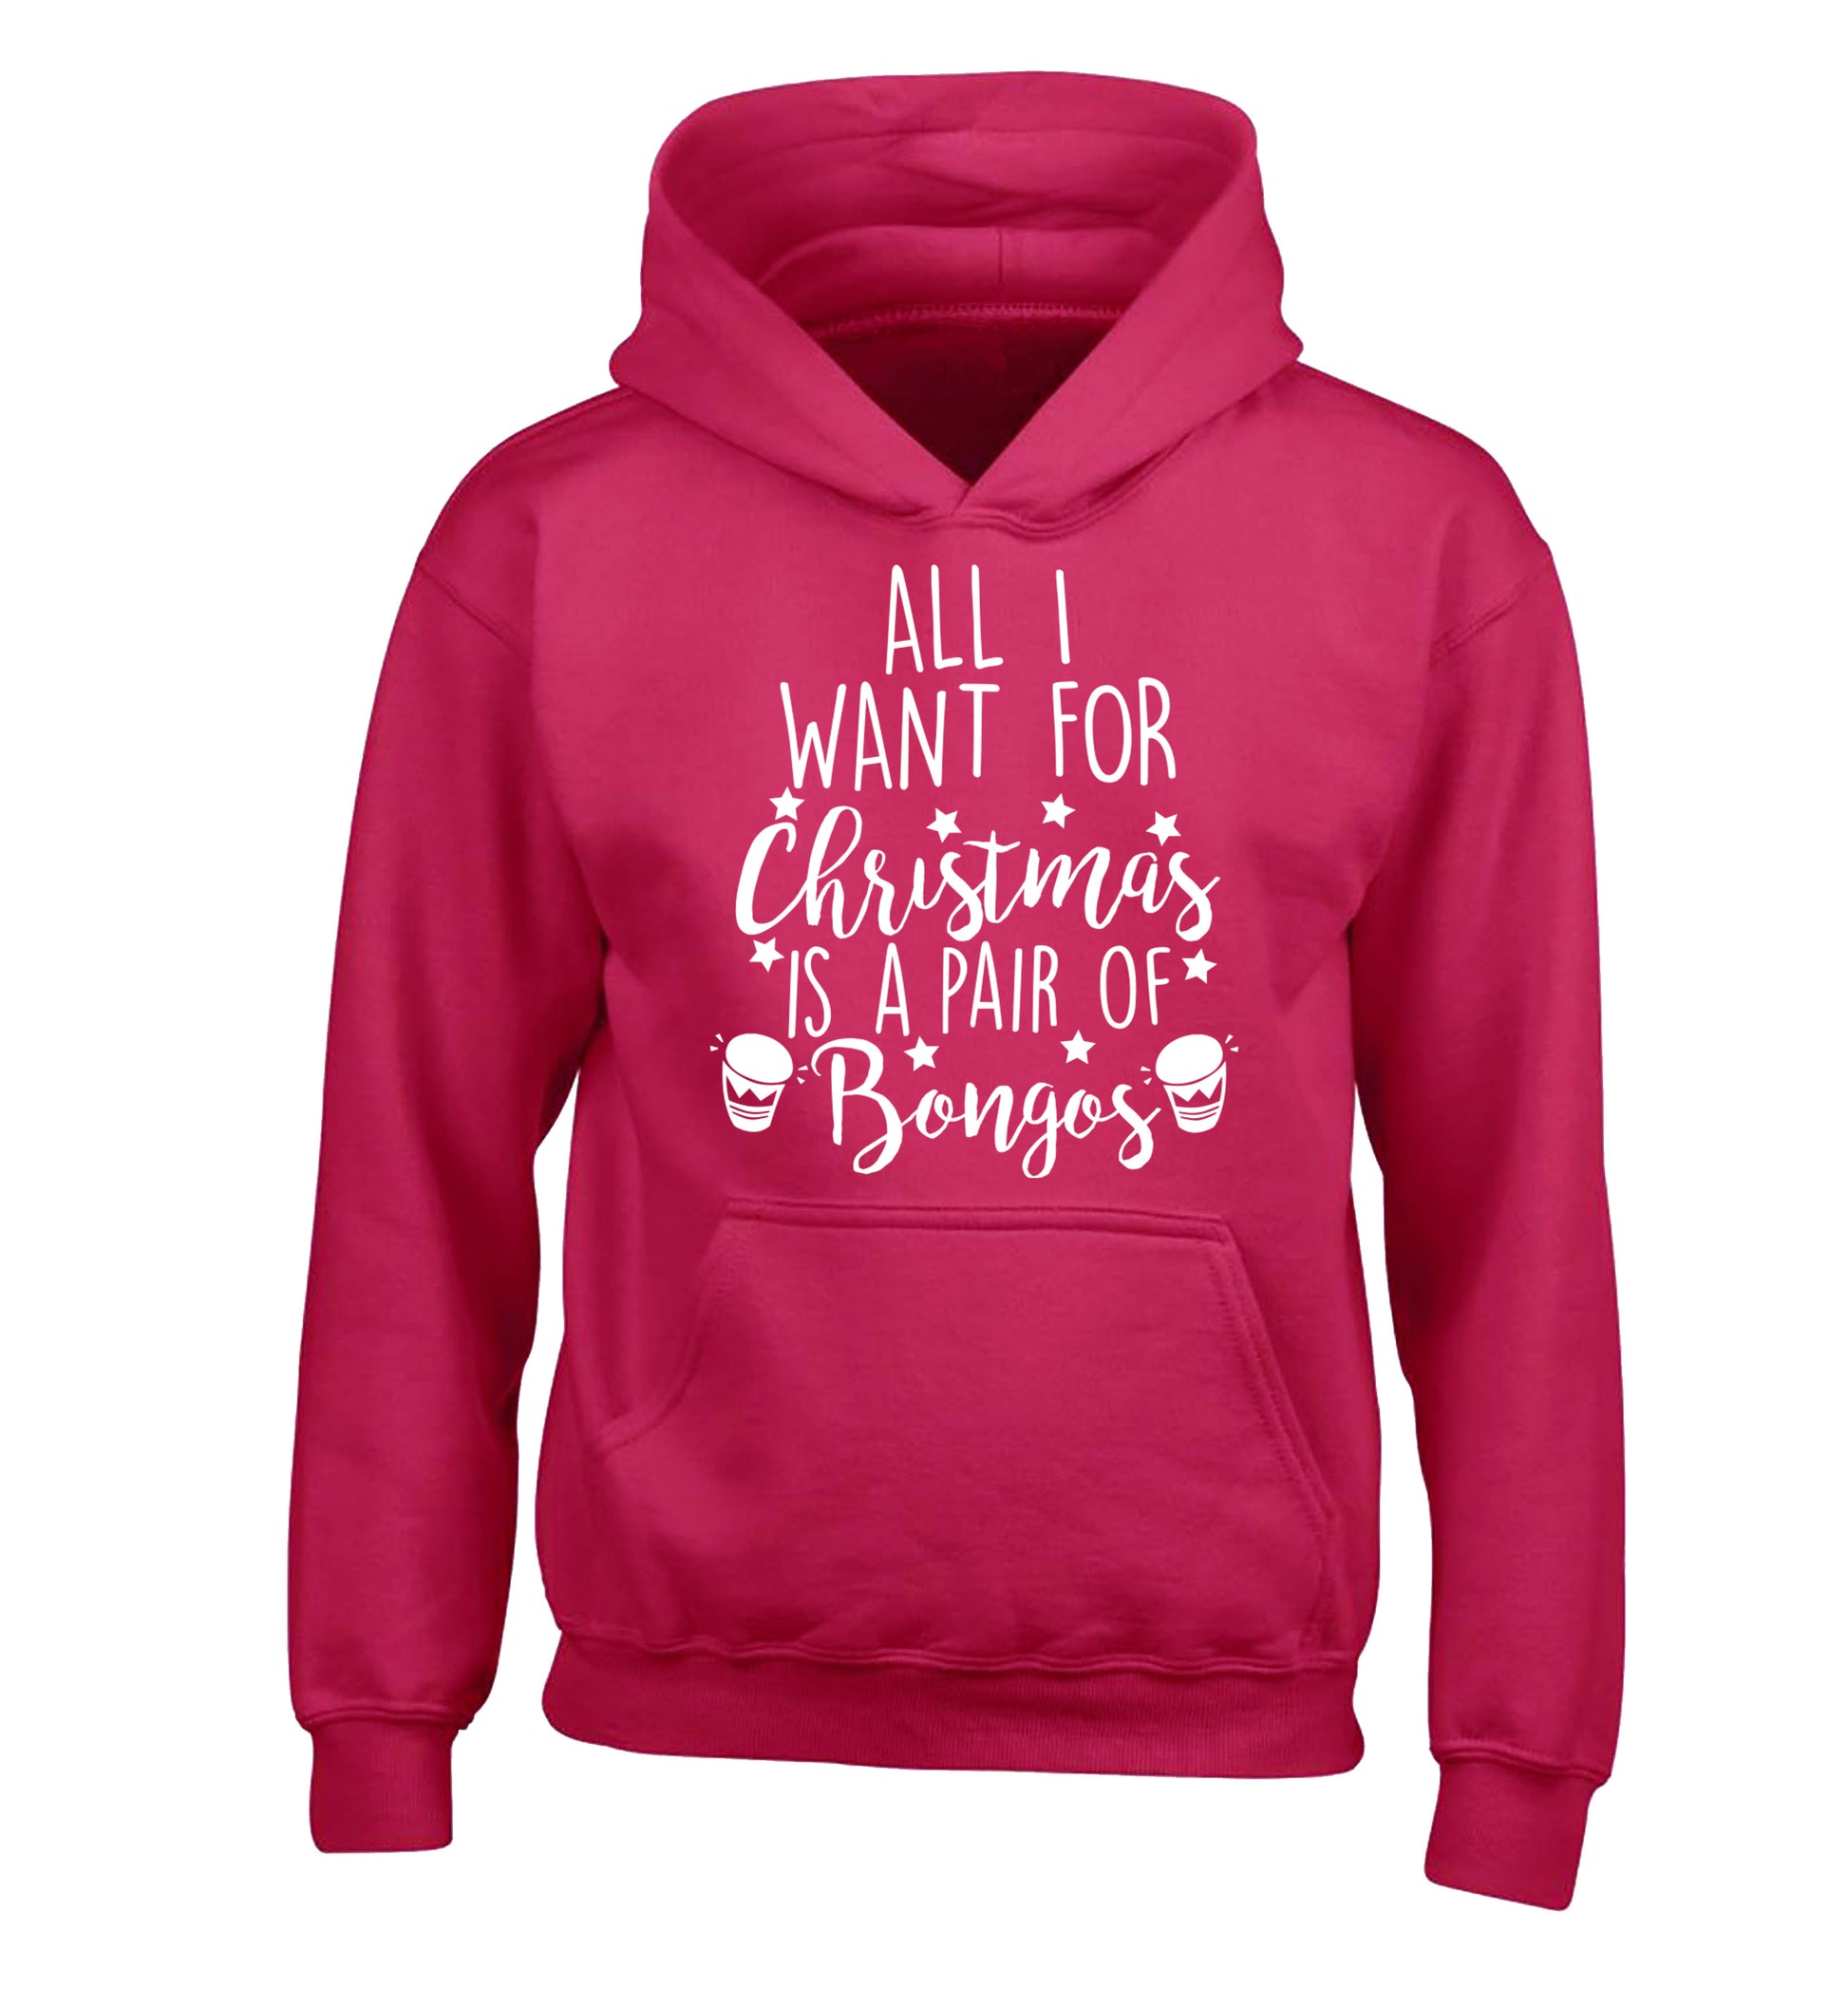 All I want for Christmas is a pair of bongos! children's pink hoodie 12-14 Years